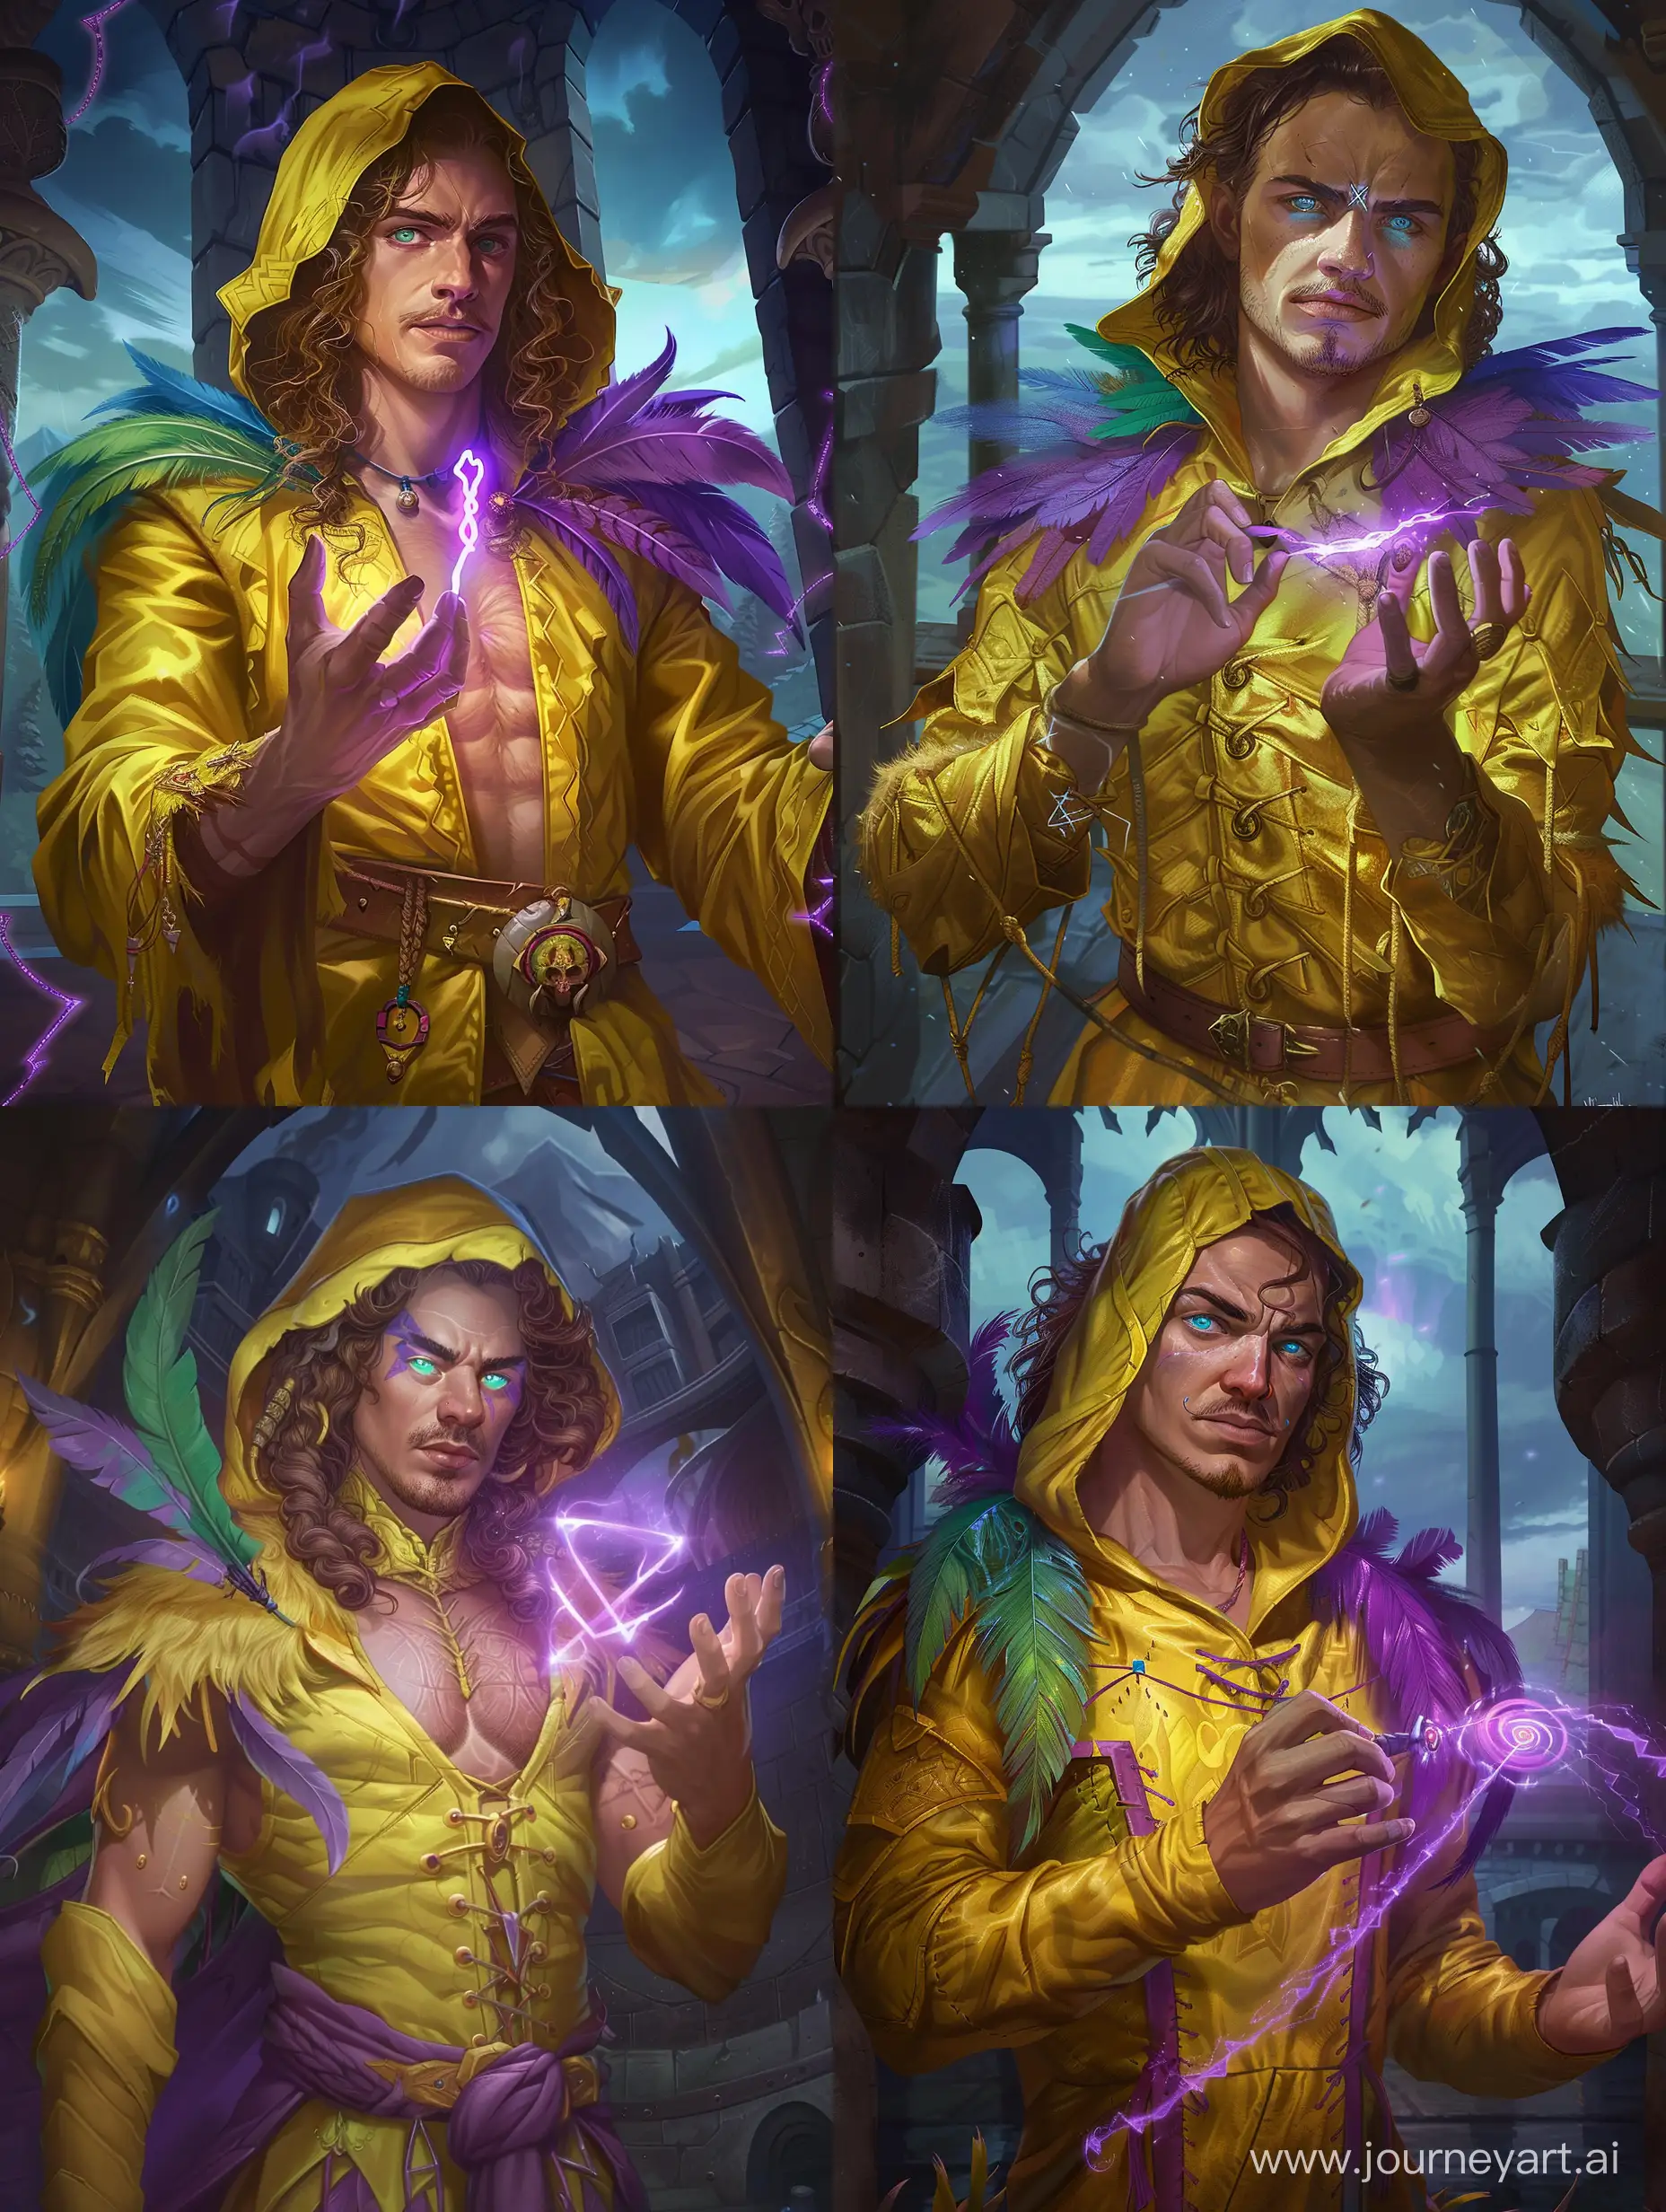 pathfinder character portrait of a human male sorcerer standing in full height full body seen, drawing a magical purple coloured rune in the air with his fingiers which glowing highlights his face, mid fit physique, straight button nose with a bit of wide nasal bridge and upturned little bit wide point, blue-green oval eyes, angled thin lowset eyebrows, short mouth, long loose curly light-brown hair going over shoulders and braided at the head temples, bristly mustache , slavic look, sarcastic expression , wearing yellow coloured tevinter like mage robes with purple-green-blue coloured feathers covering his shoulders,  wearing a hood over his head with overshadowing his face, eyes slightly glowing in the shadow of his hood, inside of a wizard tower with view of midnight background, pathfinder character portrait art style